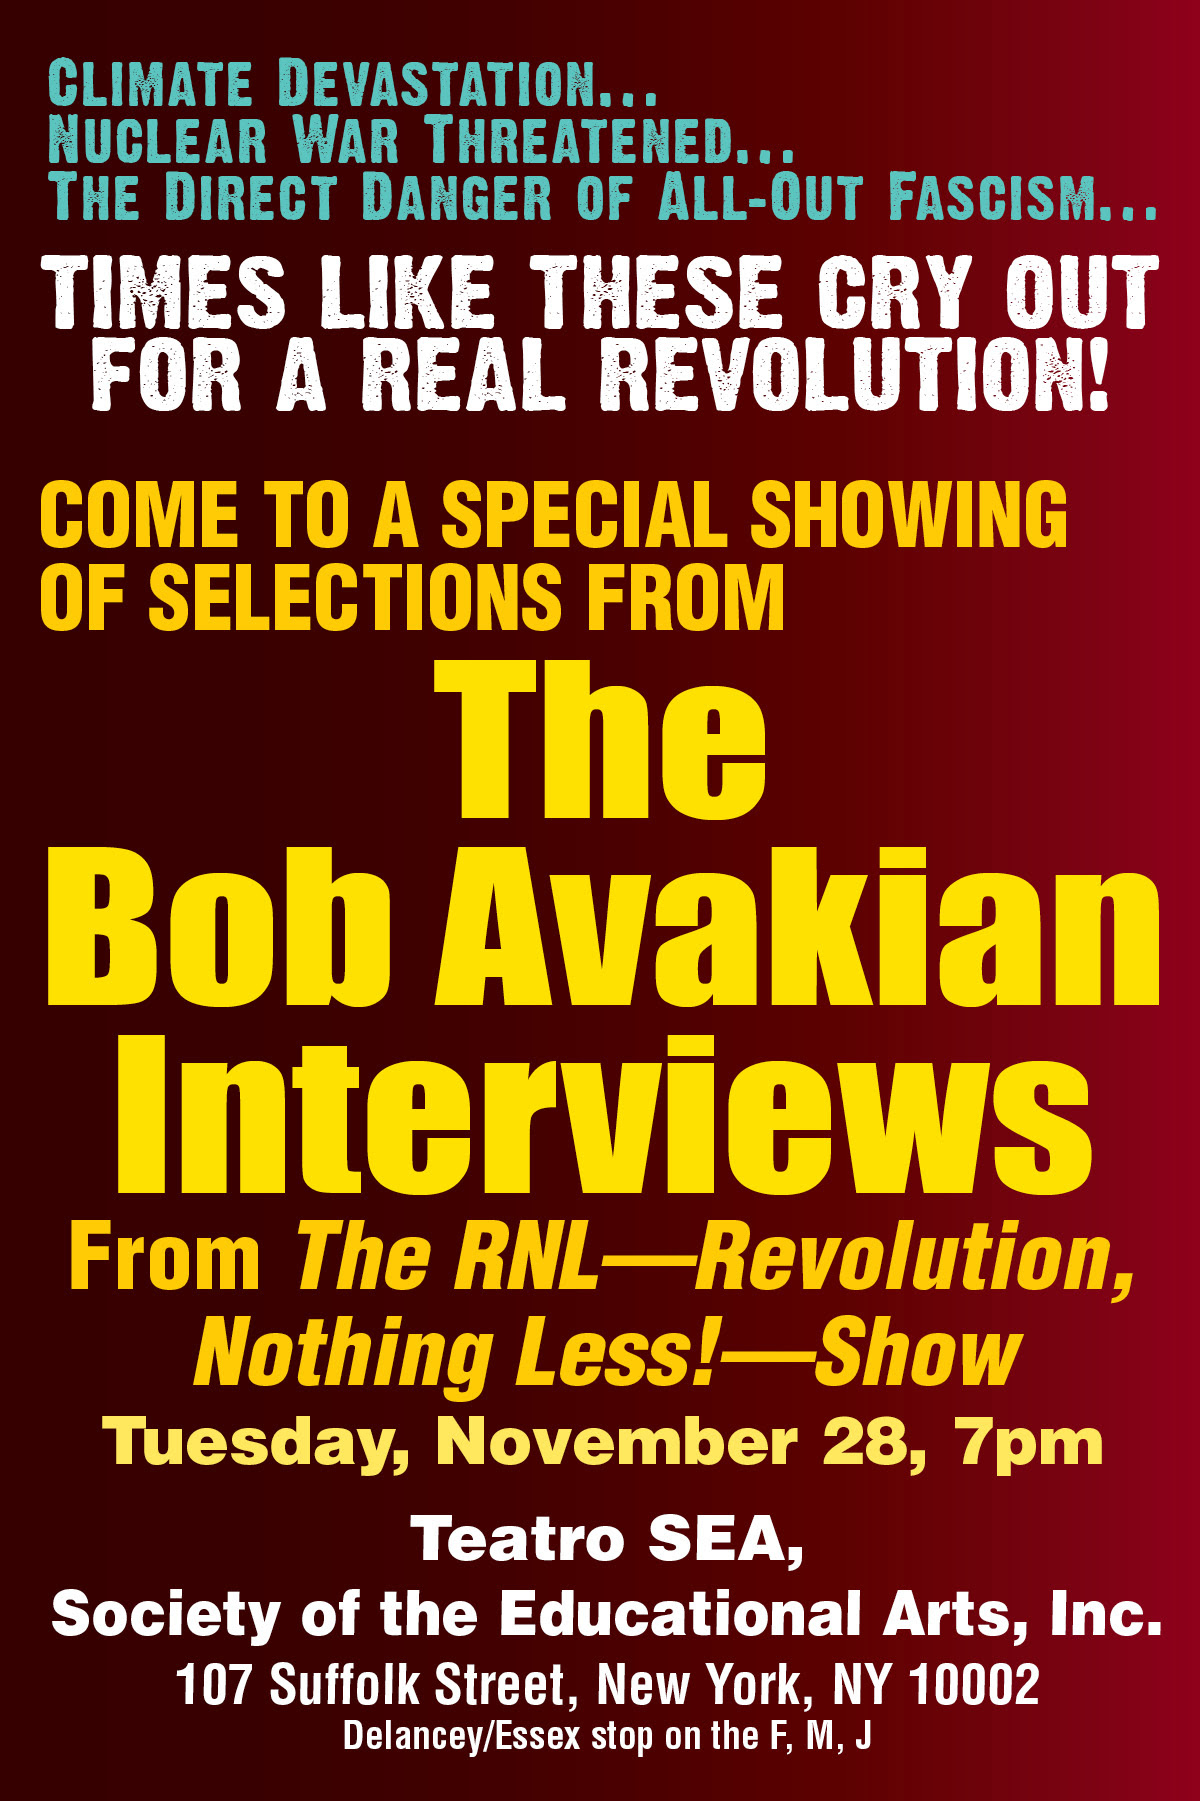 BA special screening of the Bob Avakian Interviews in New York